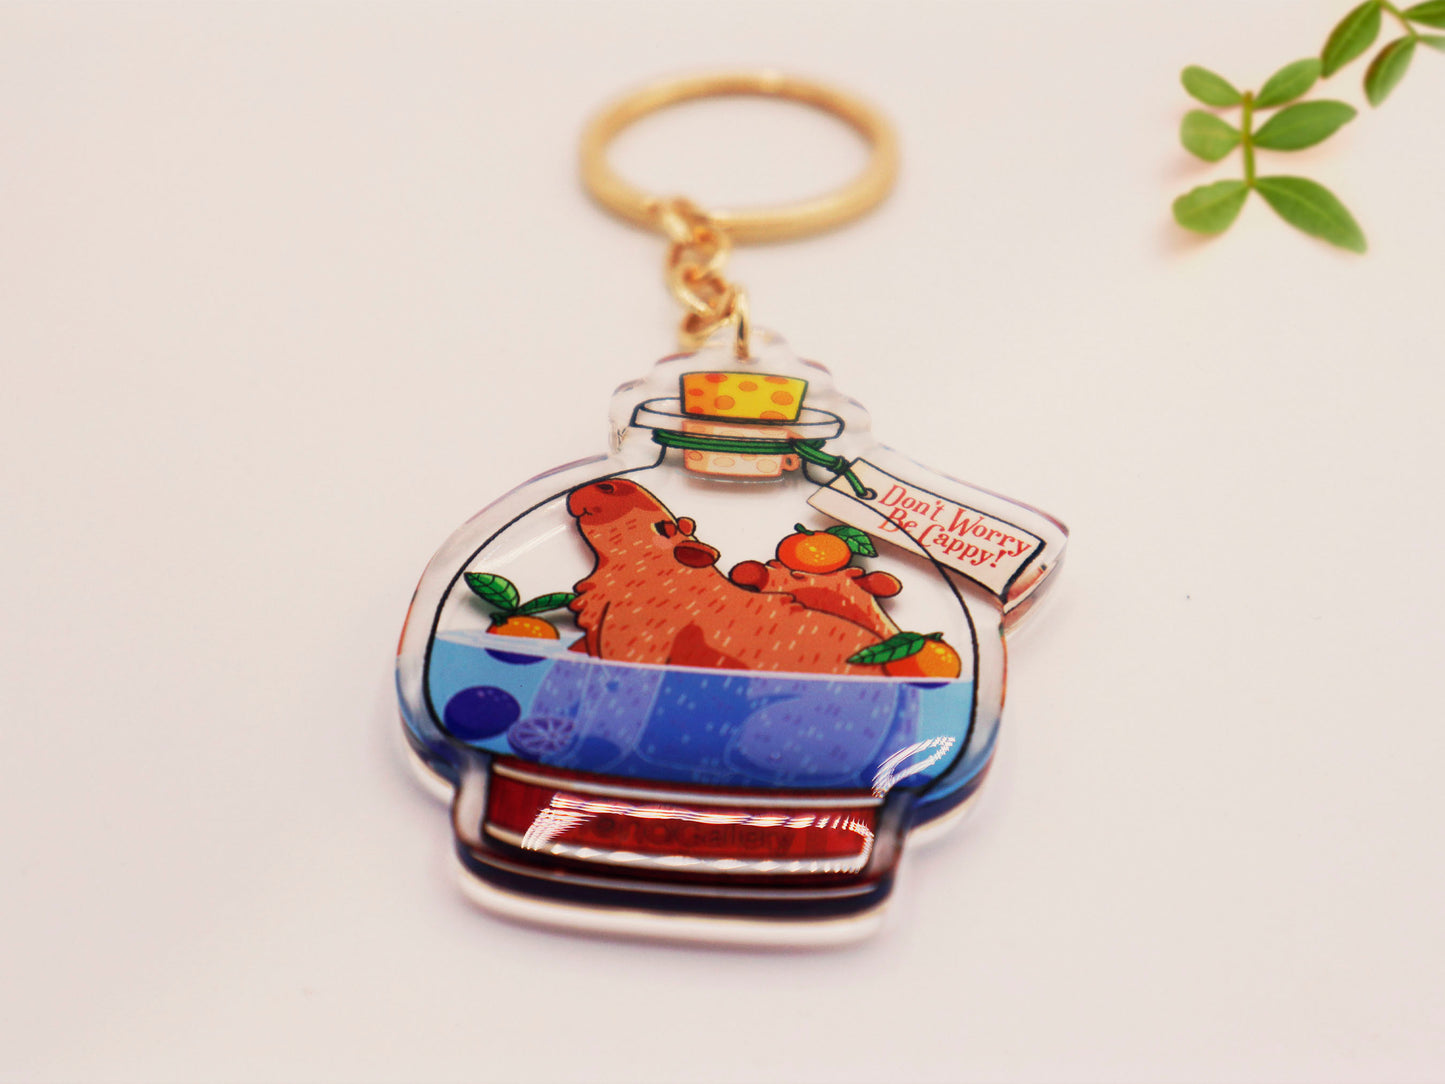 Double sided epoxy clear acrylic keychain with golden clasp of two happy capybaras sat inside an Onsen shaped potion bottle with yuzu oranges, with the potion bottle labelled Potion of Relaxation 